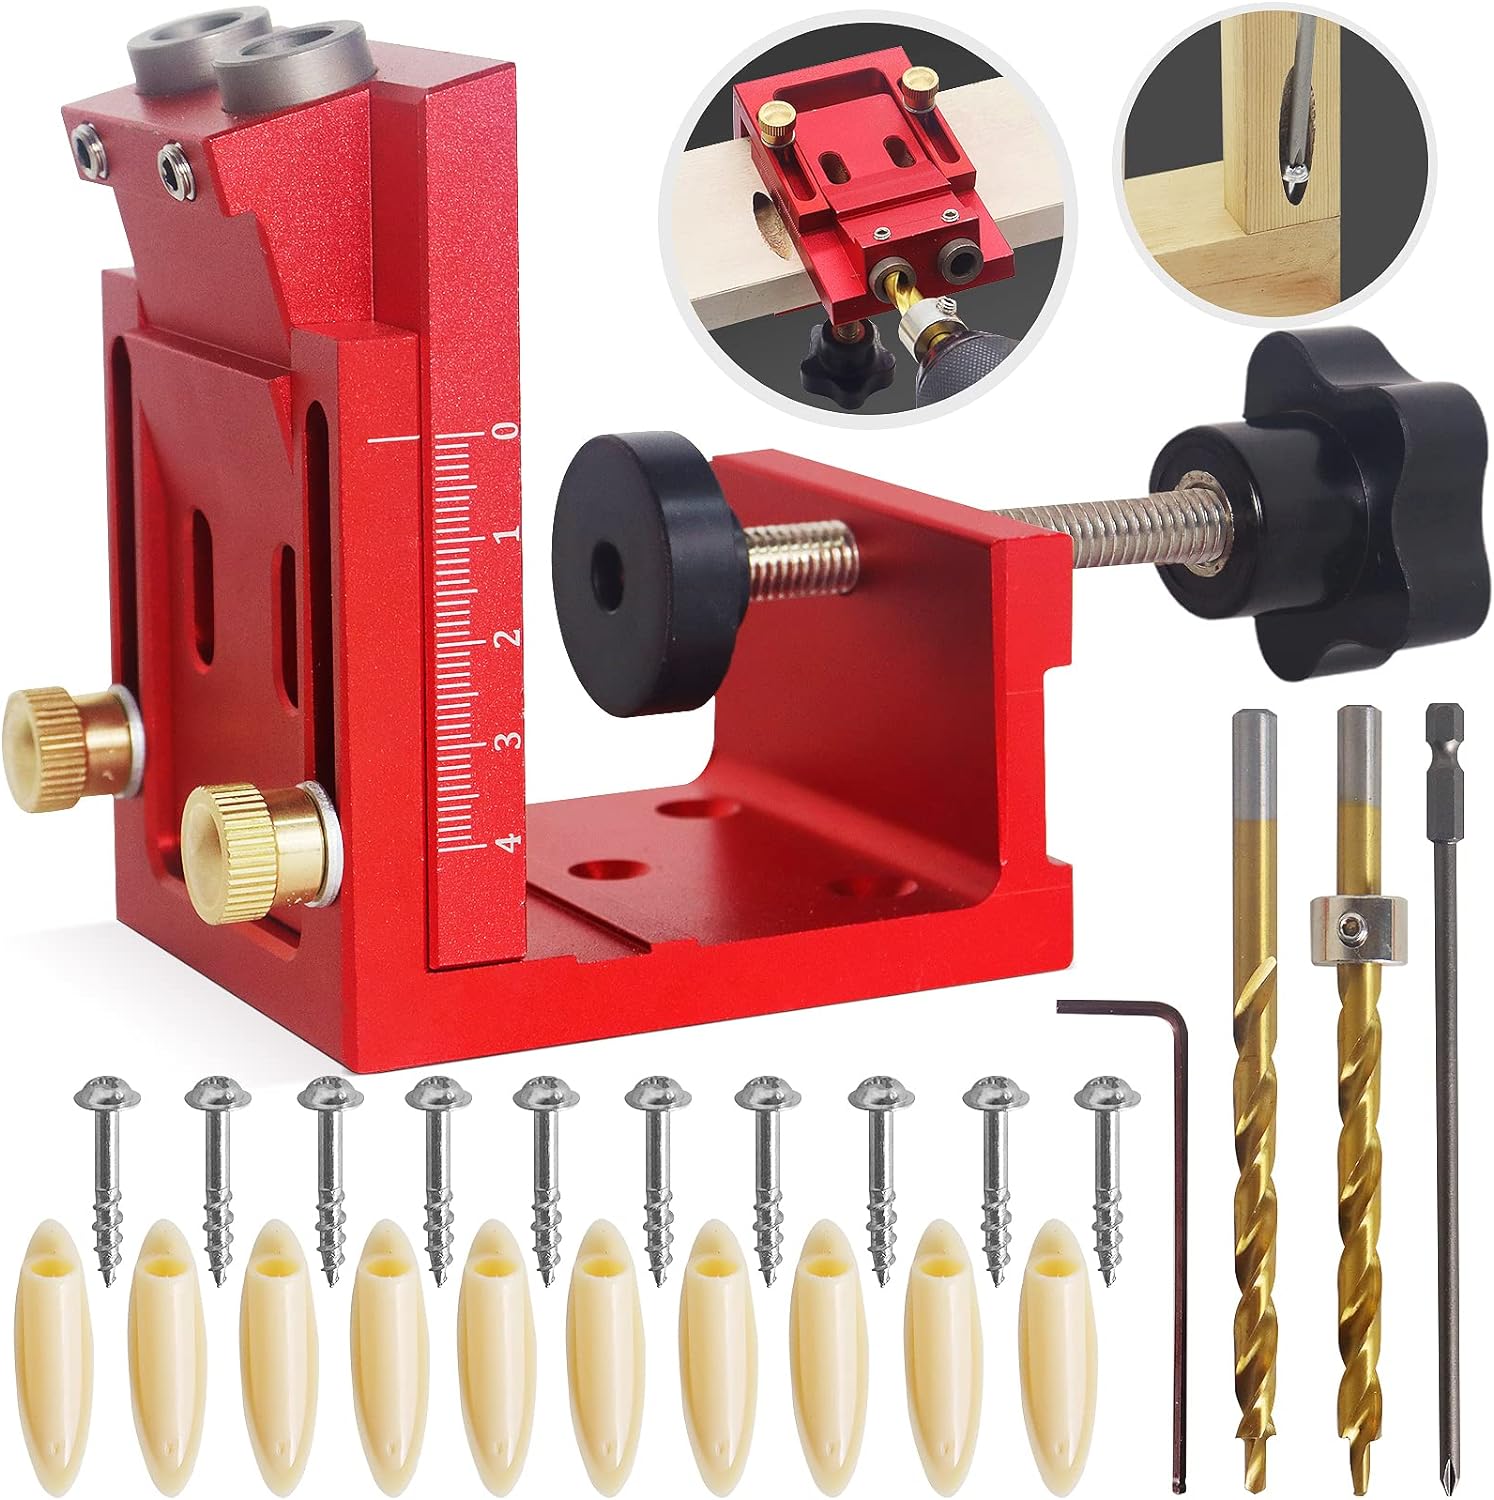 jigs for woodworking